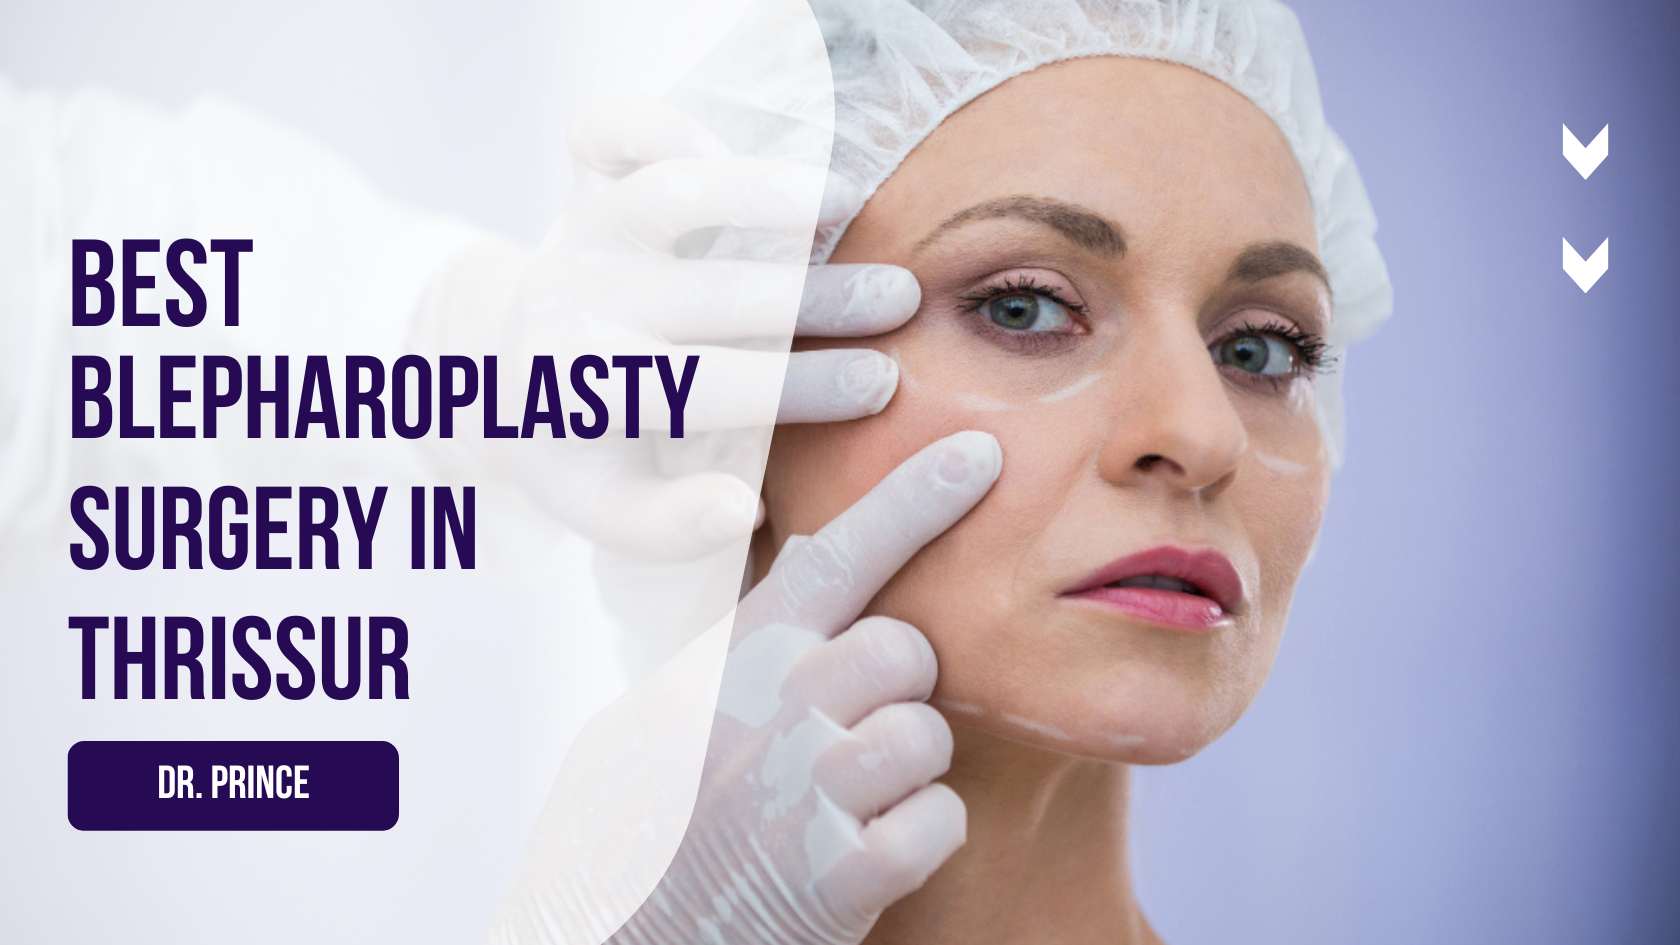 Blepharoplasty Surgery Before and After Results